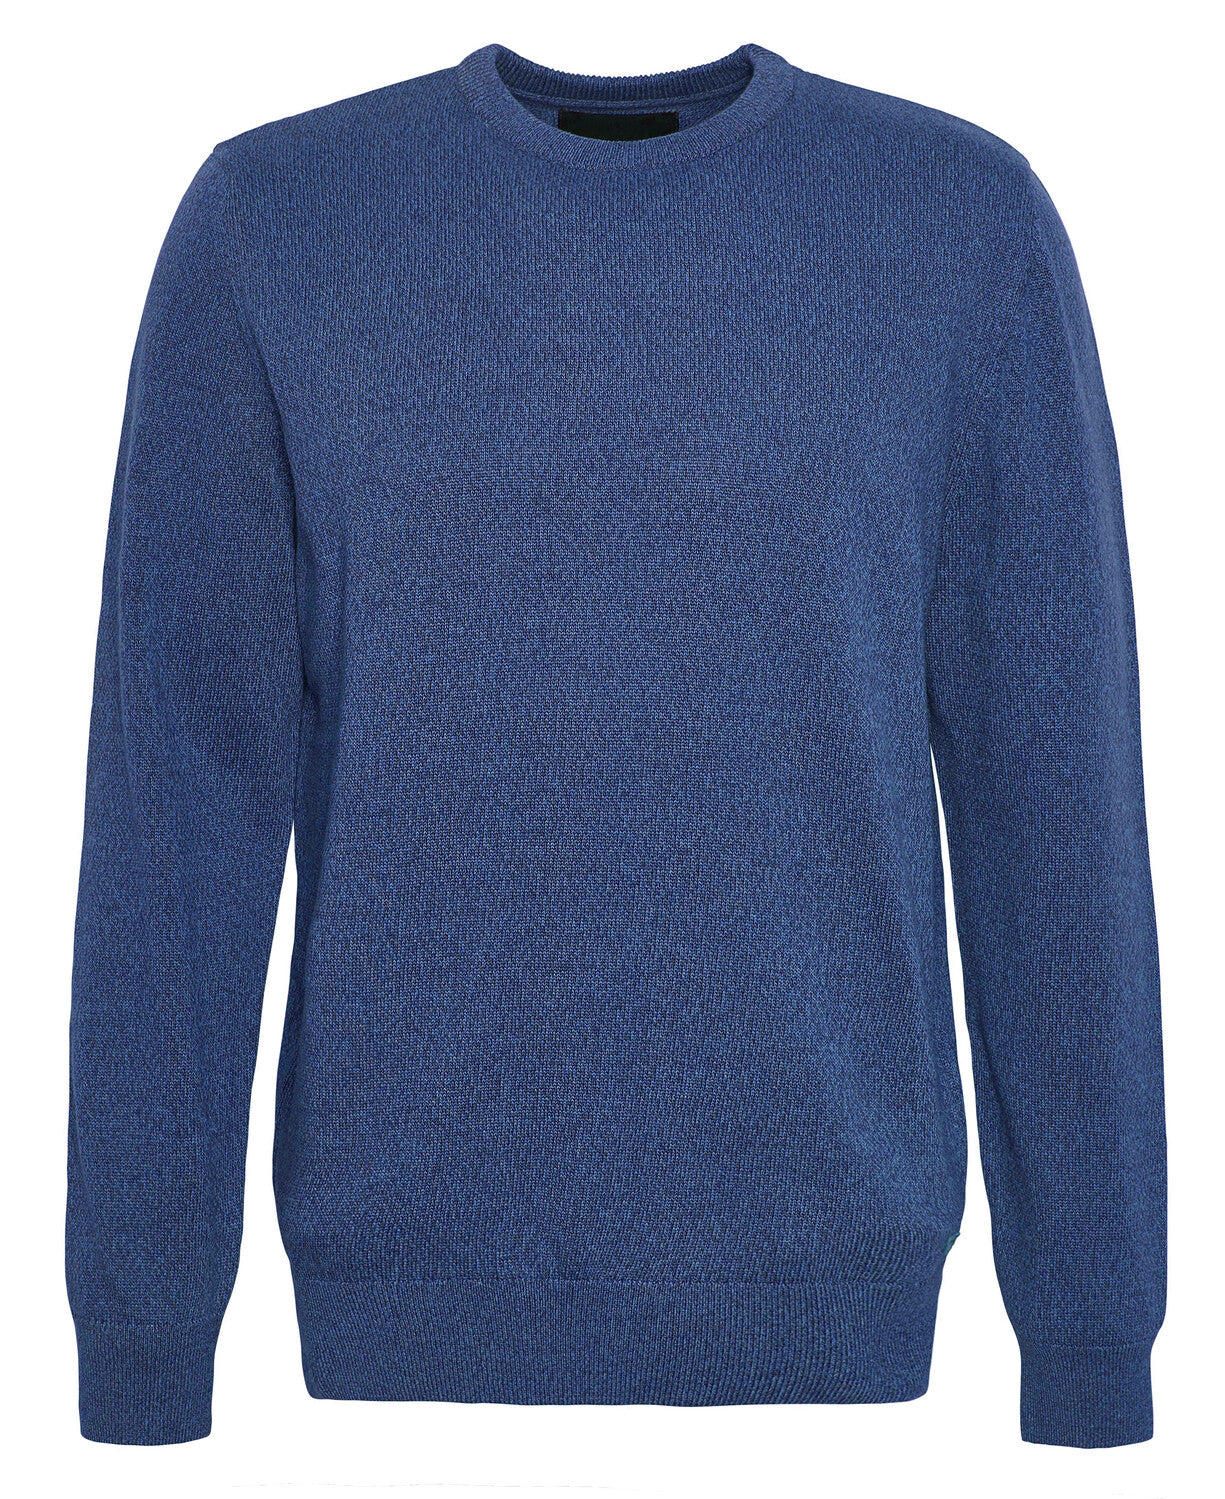 Barbour Whitfield Crew Neck Navy Jumper